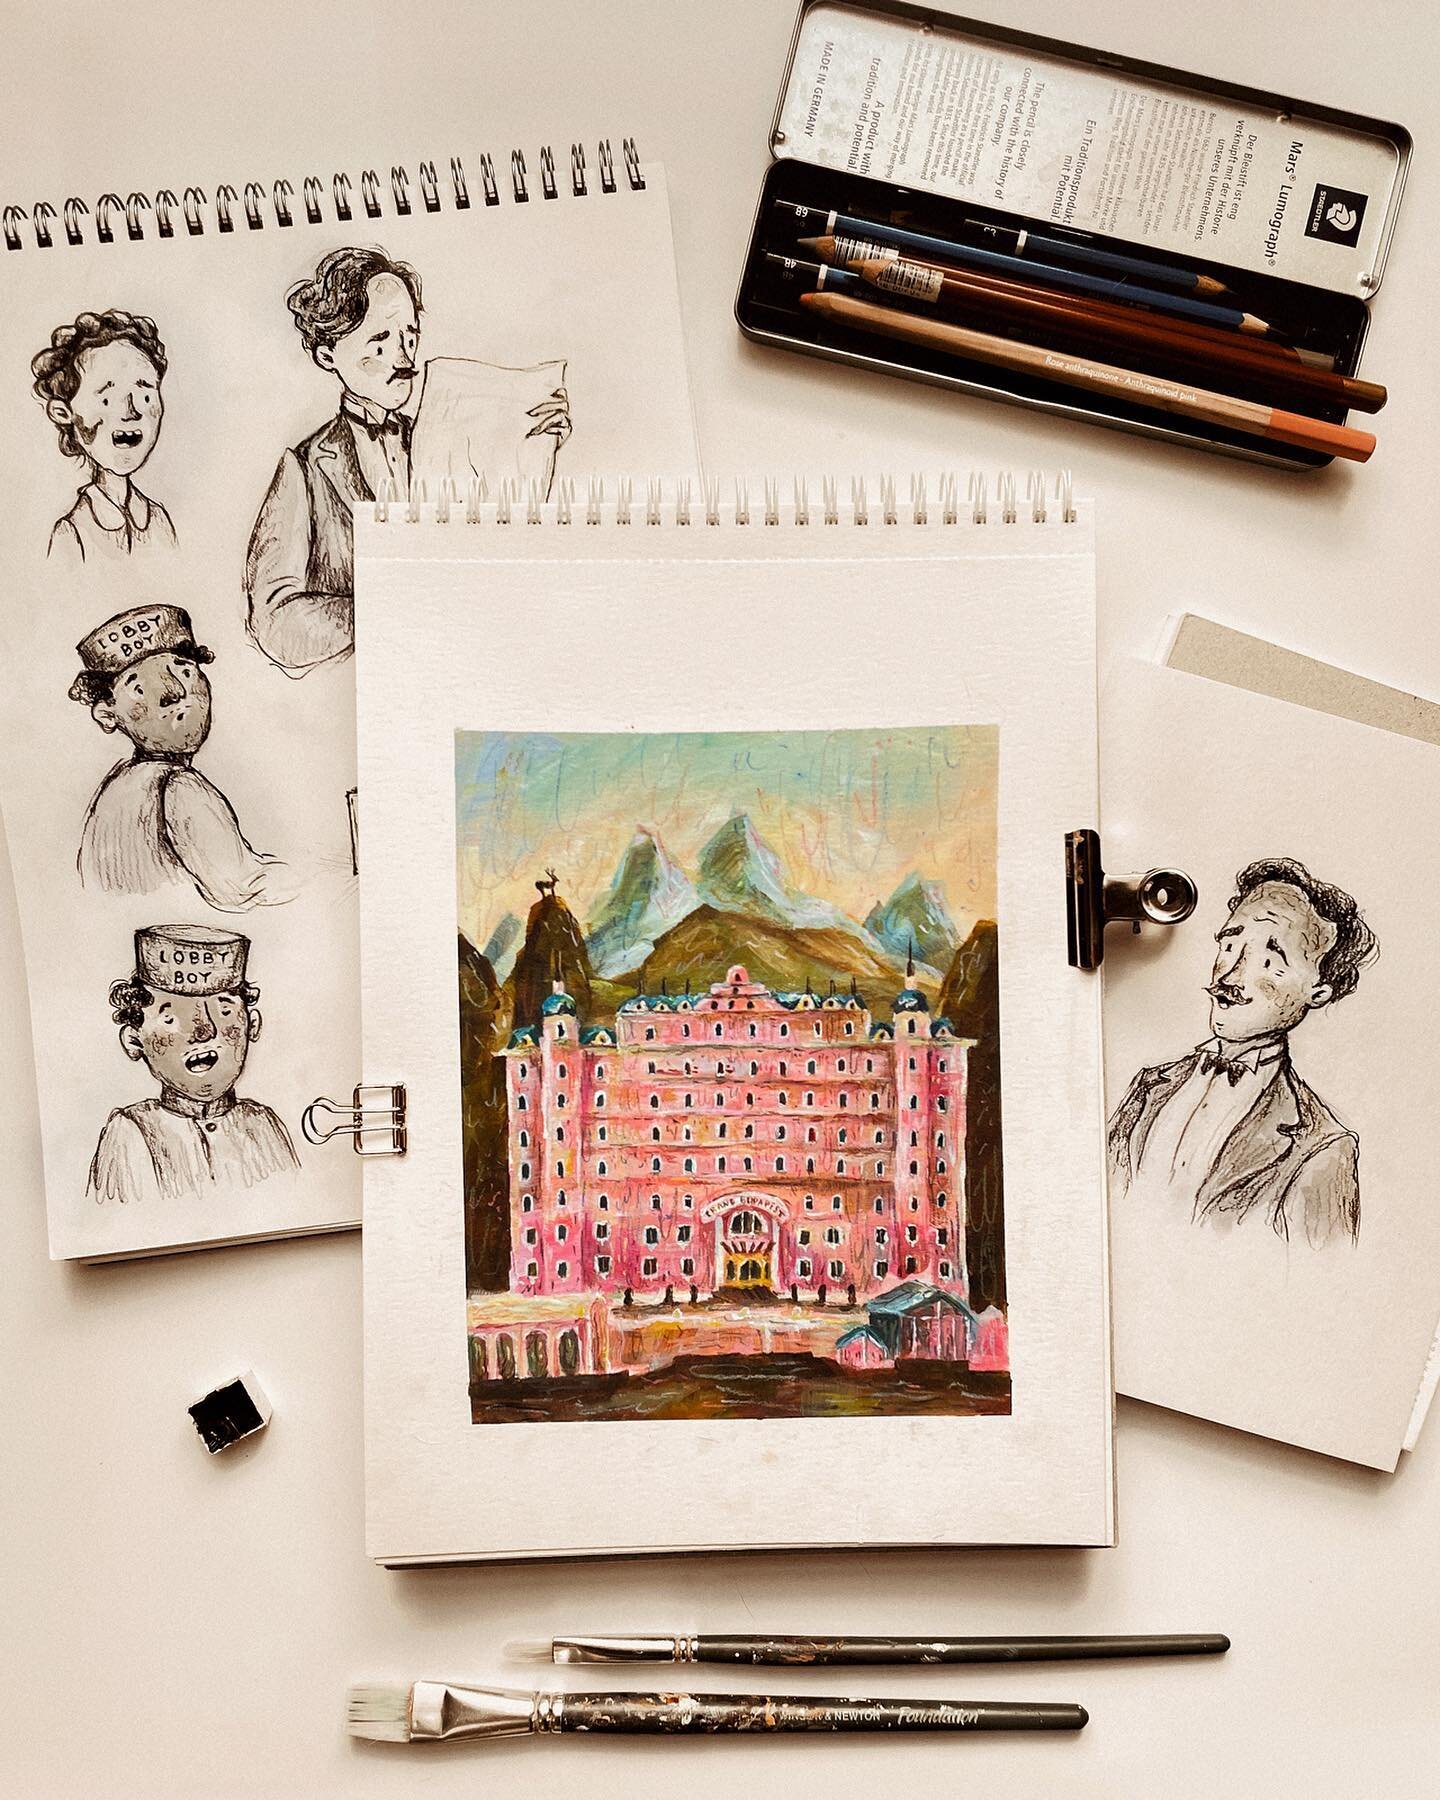 The Grand Budapest Hotel Fan Art 💓. I often take inspiration from the movies to practice drawing figures, emotions and beautiful scenes. So here are Monsieur Gustave, Zero and Agatha from Wes Anderson's The Grand Budapest Hotel. Love this movie so m